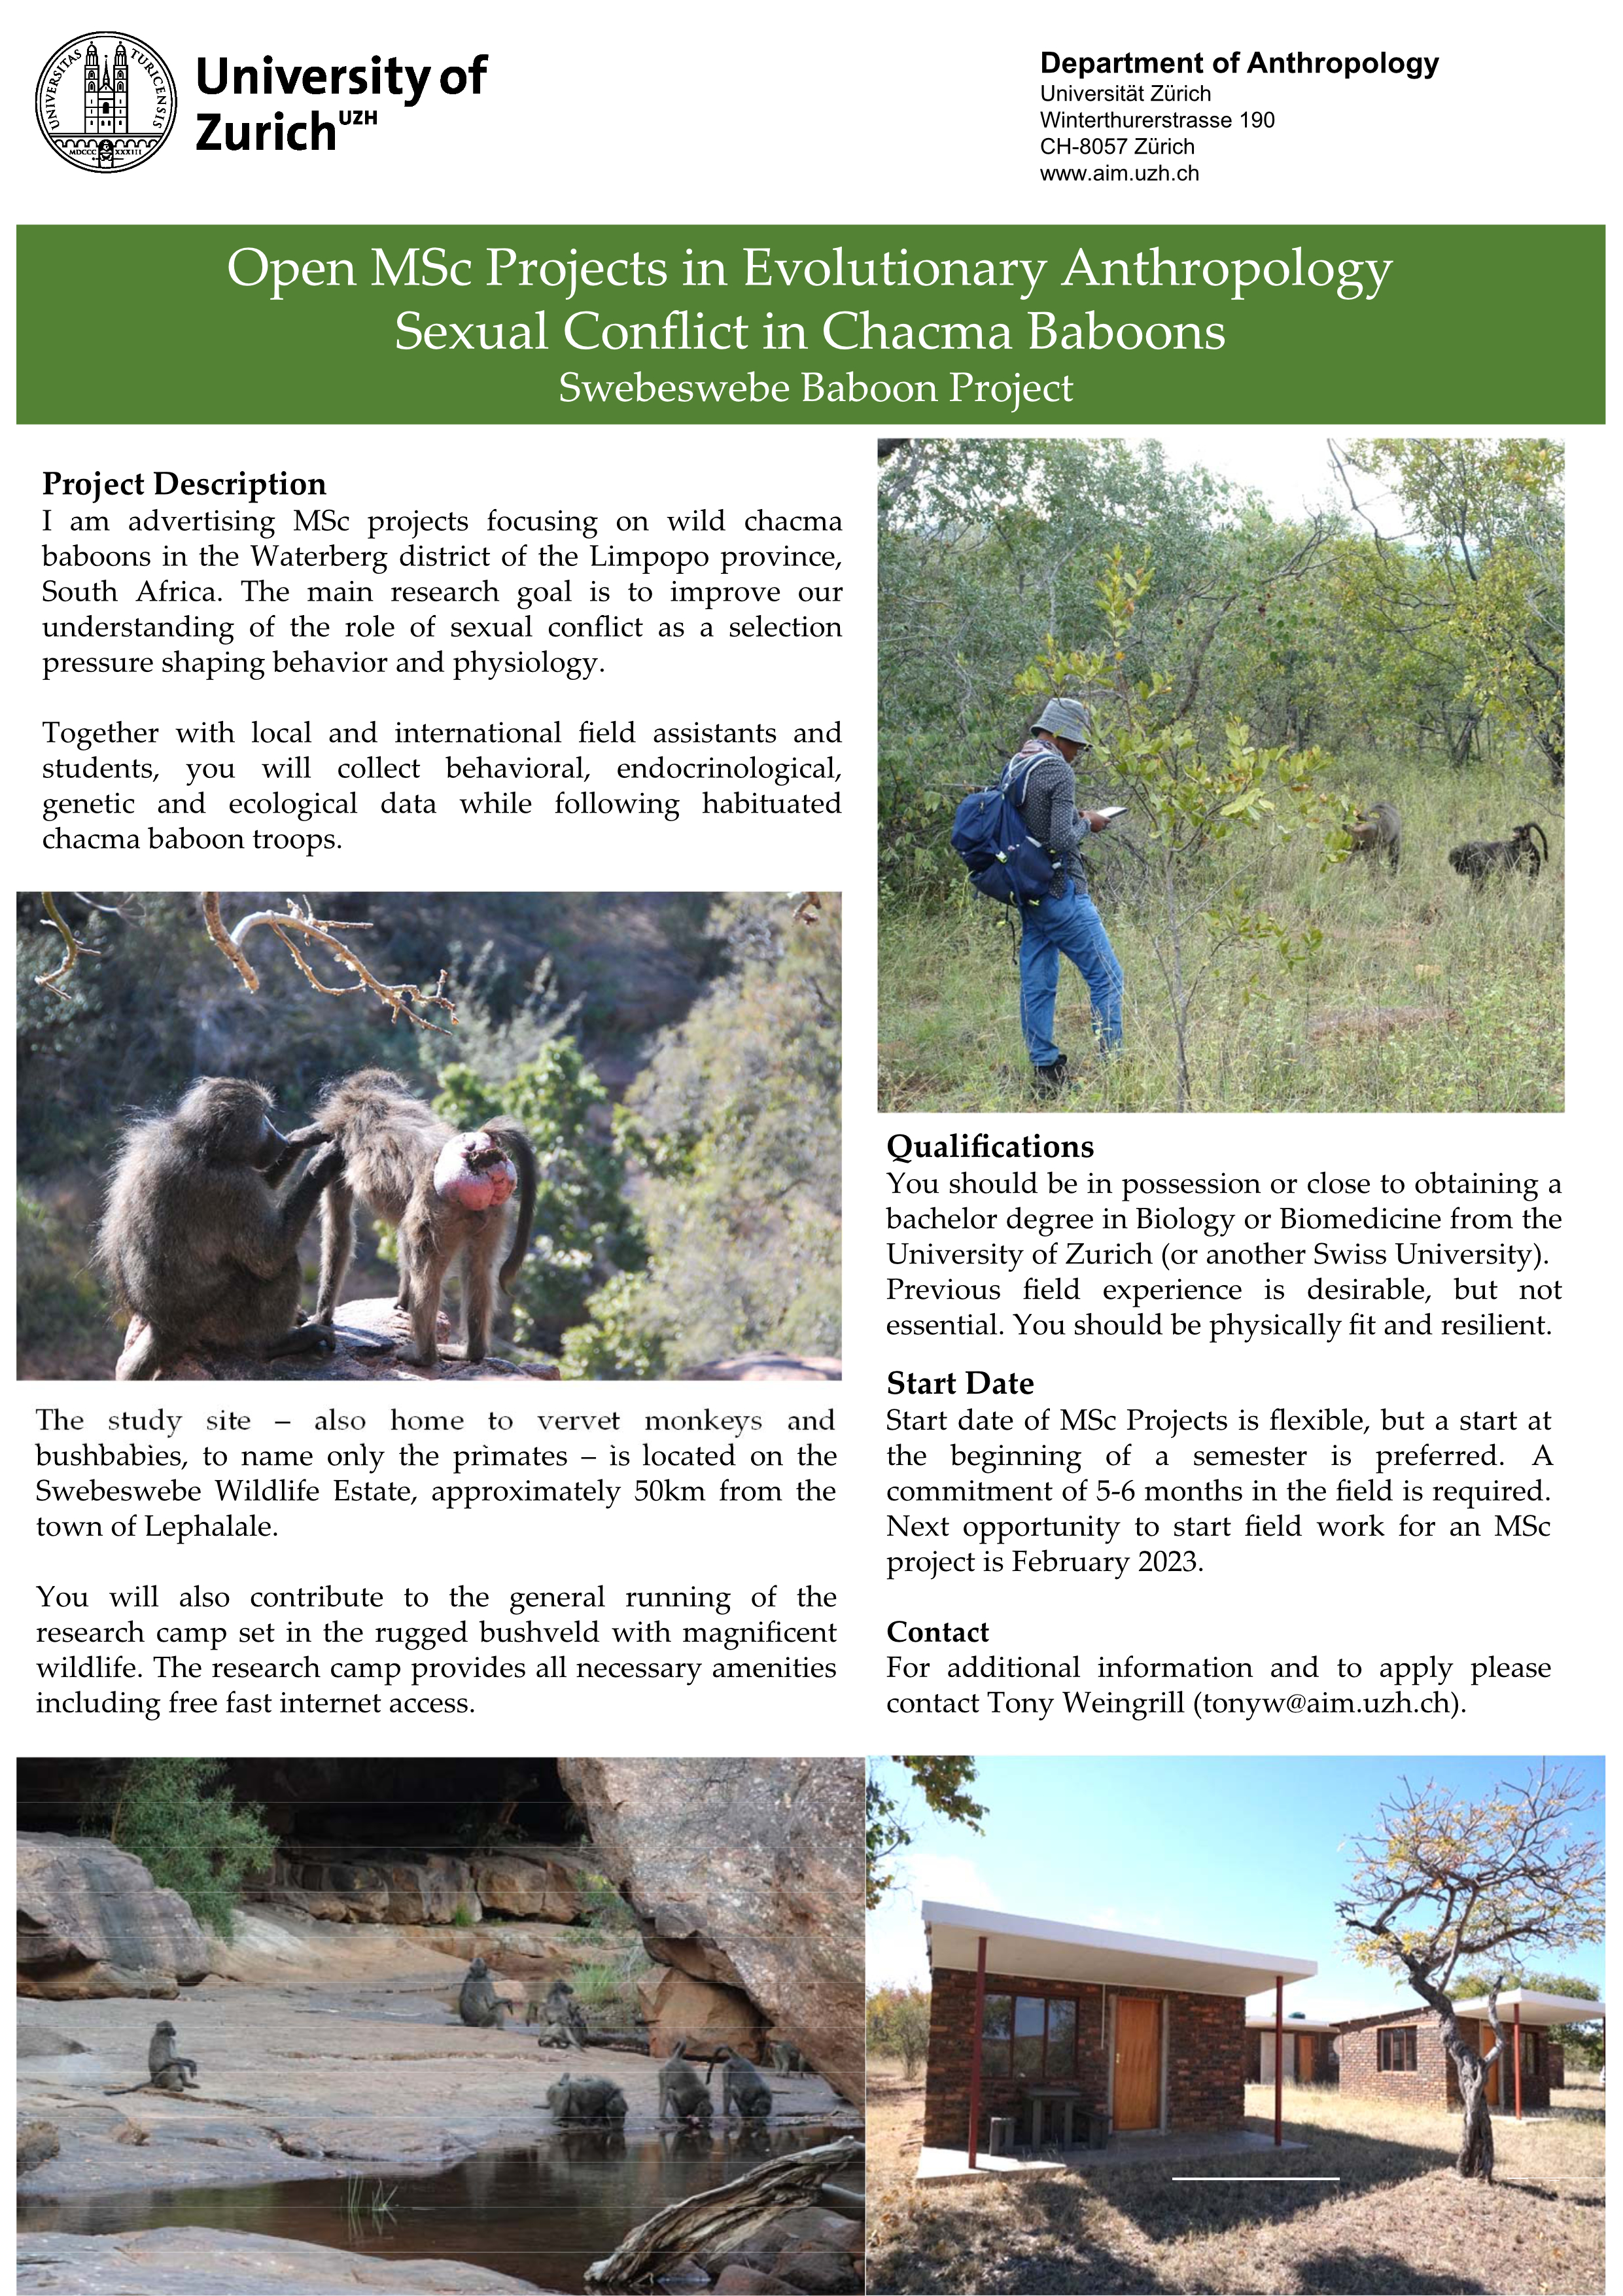 Open MSc Projects in Evolutionary Anthropology Sexual Conflict in Chacma Baboons Swebeswebe Baboon Project